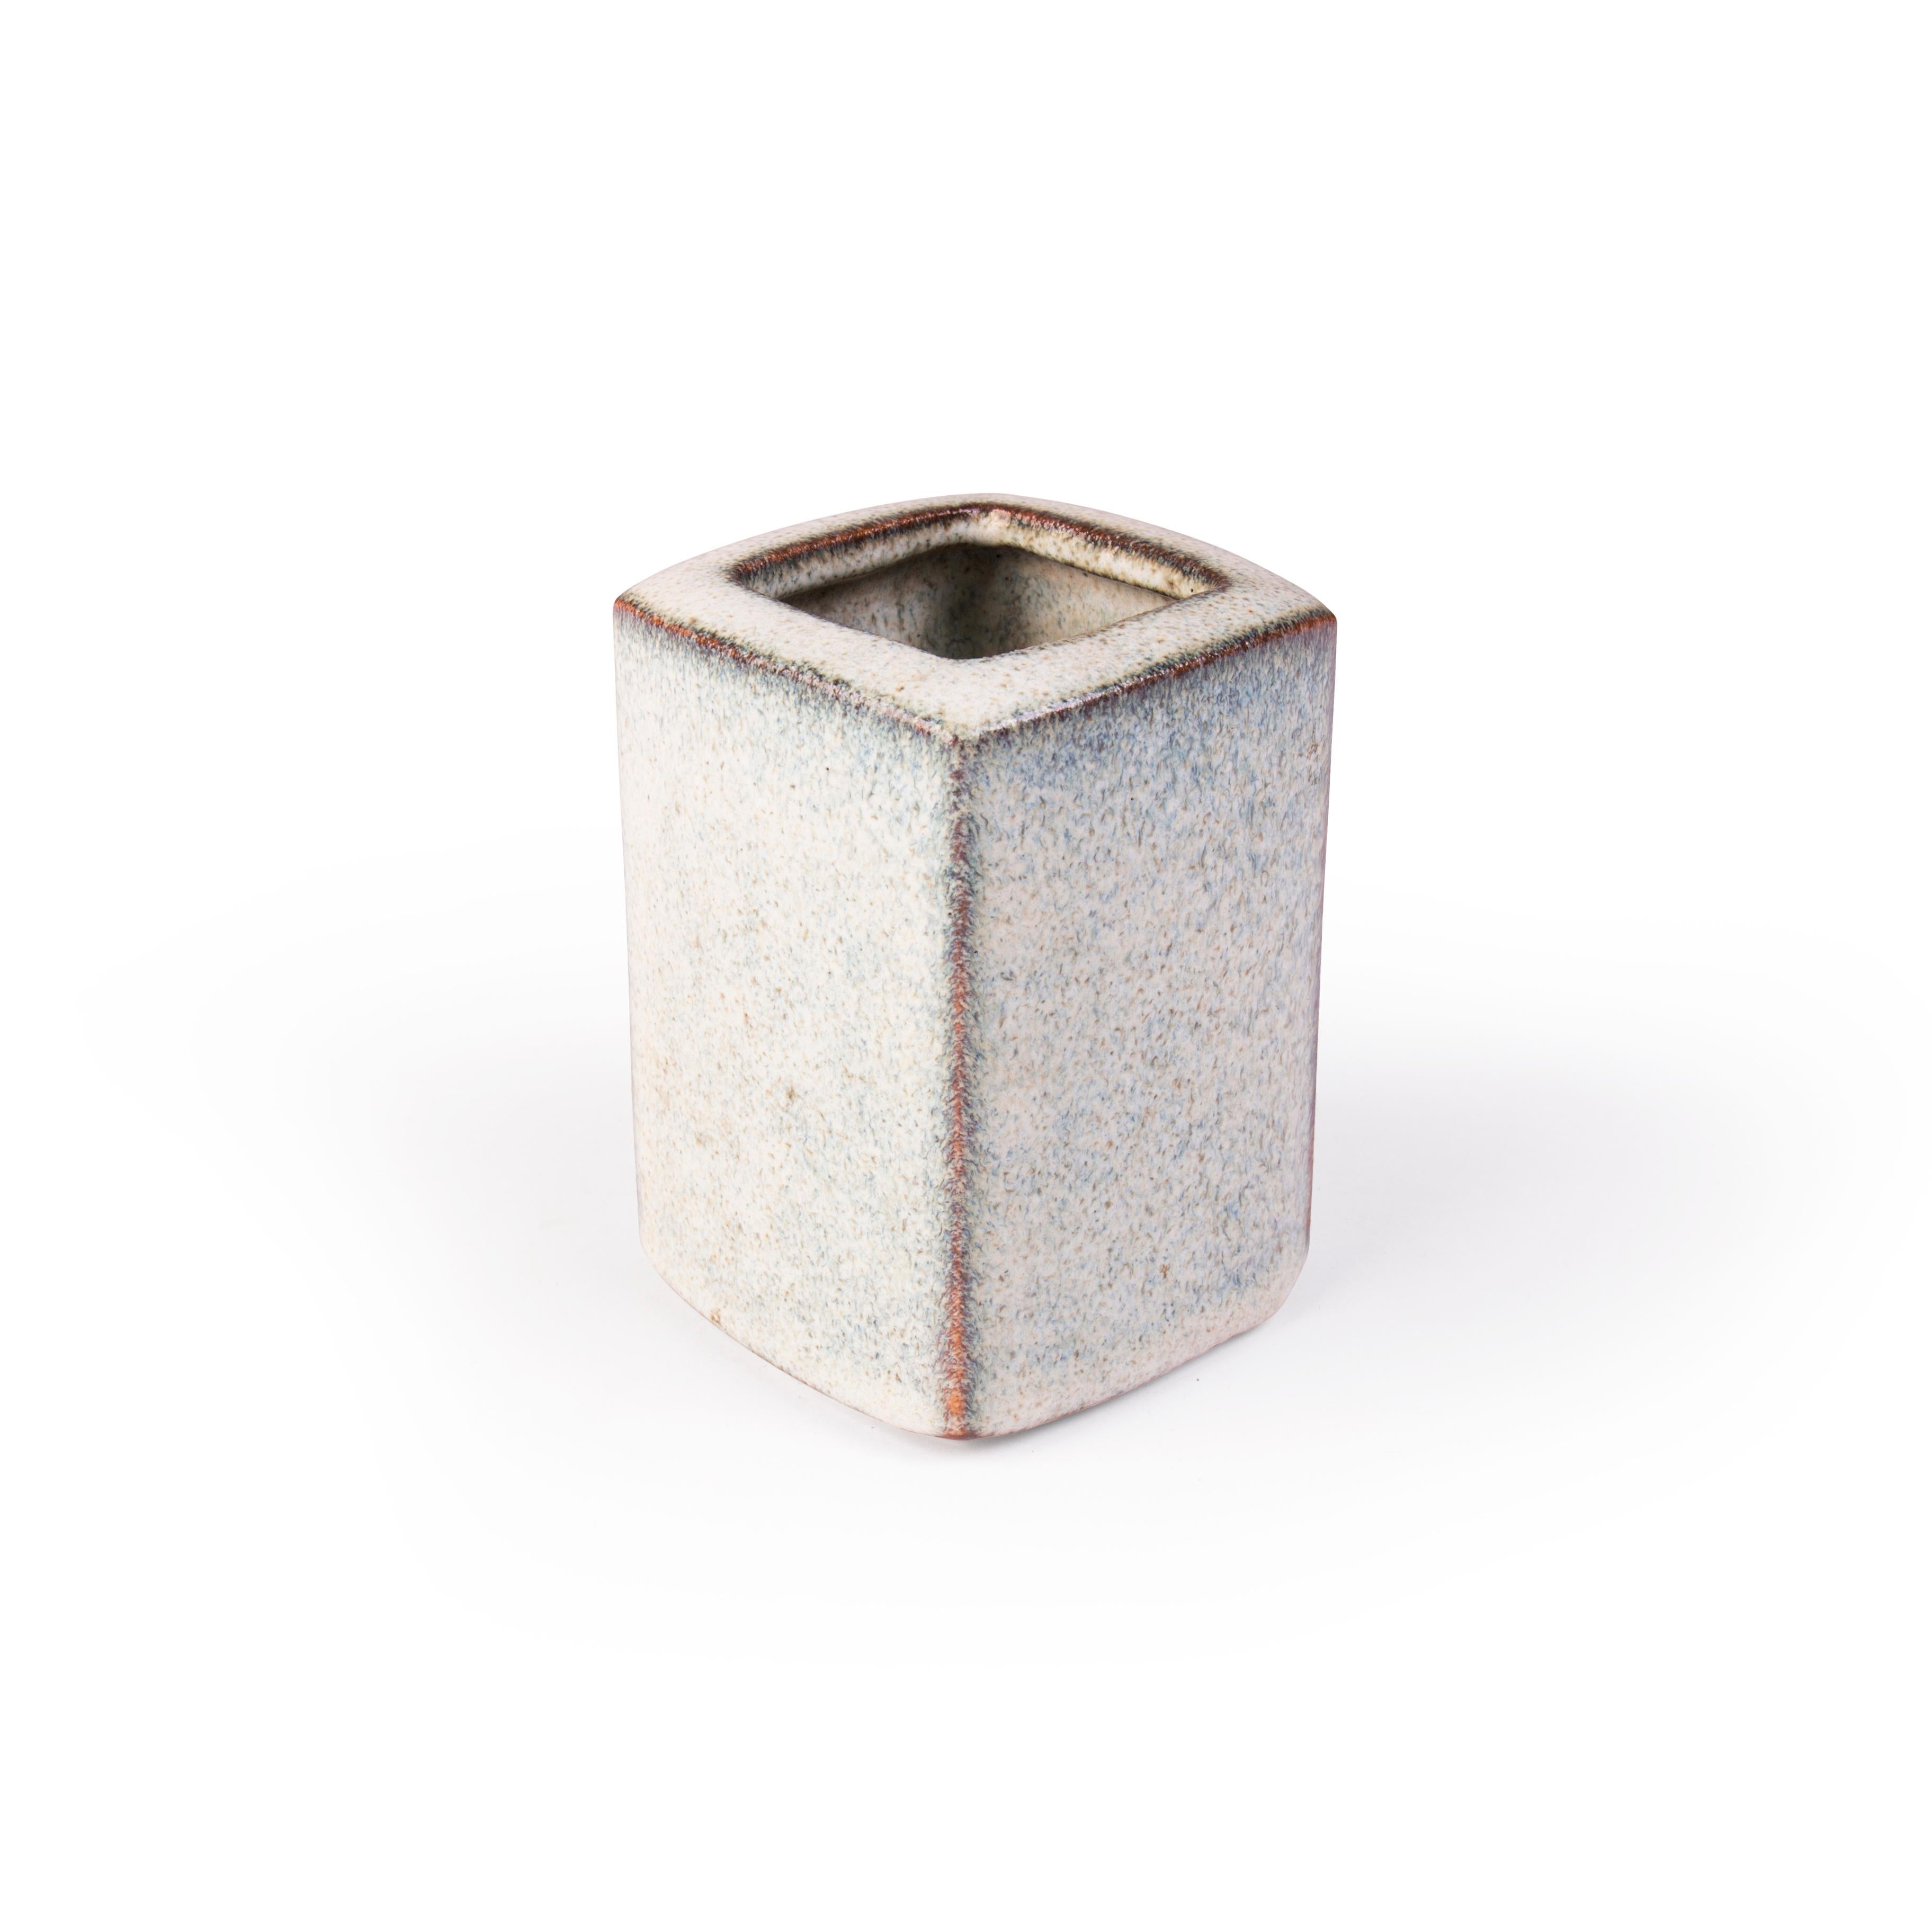 This smaller stoneware vase was designed by Preben Herluf Gottschalk-Olsen (1915-1968) and executed by Stogo Stoneware in Mørkøv, Denmark ca. in the early 1960s.

Stogo Stoneware was previously known as Mørkøv Keramikfabrik which was founded in the